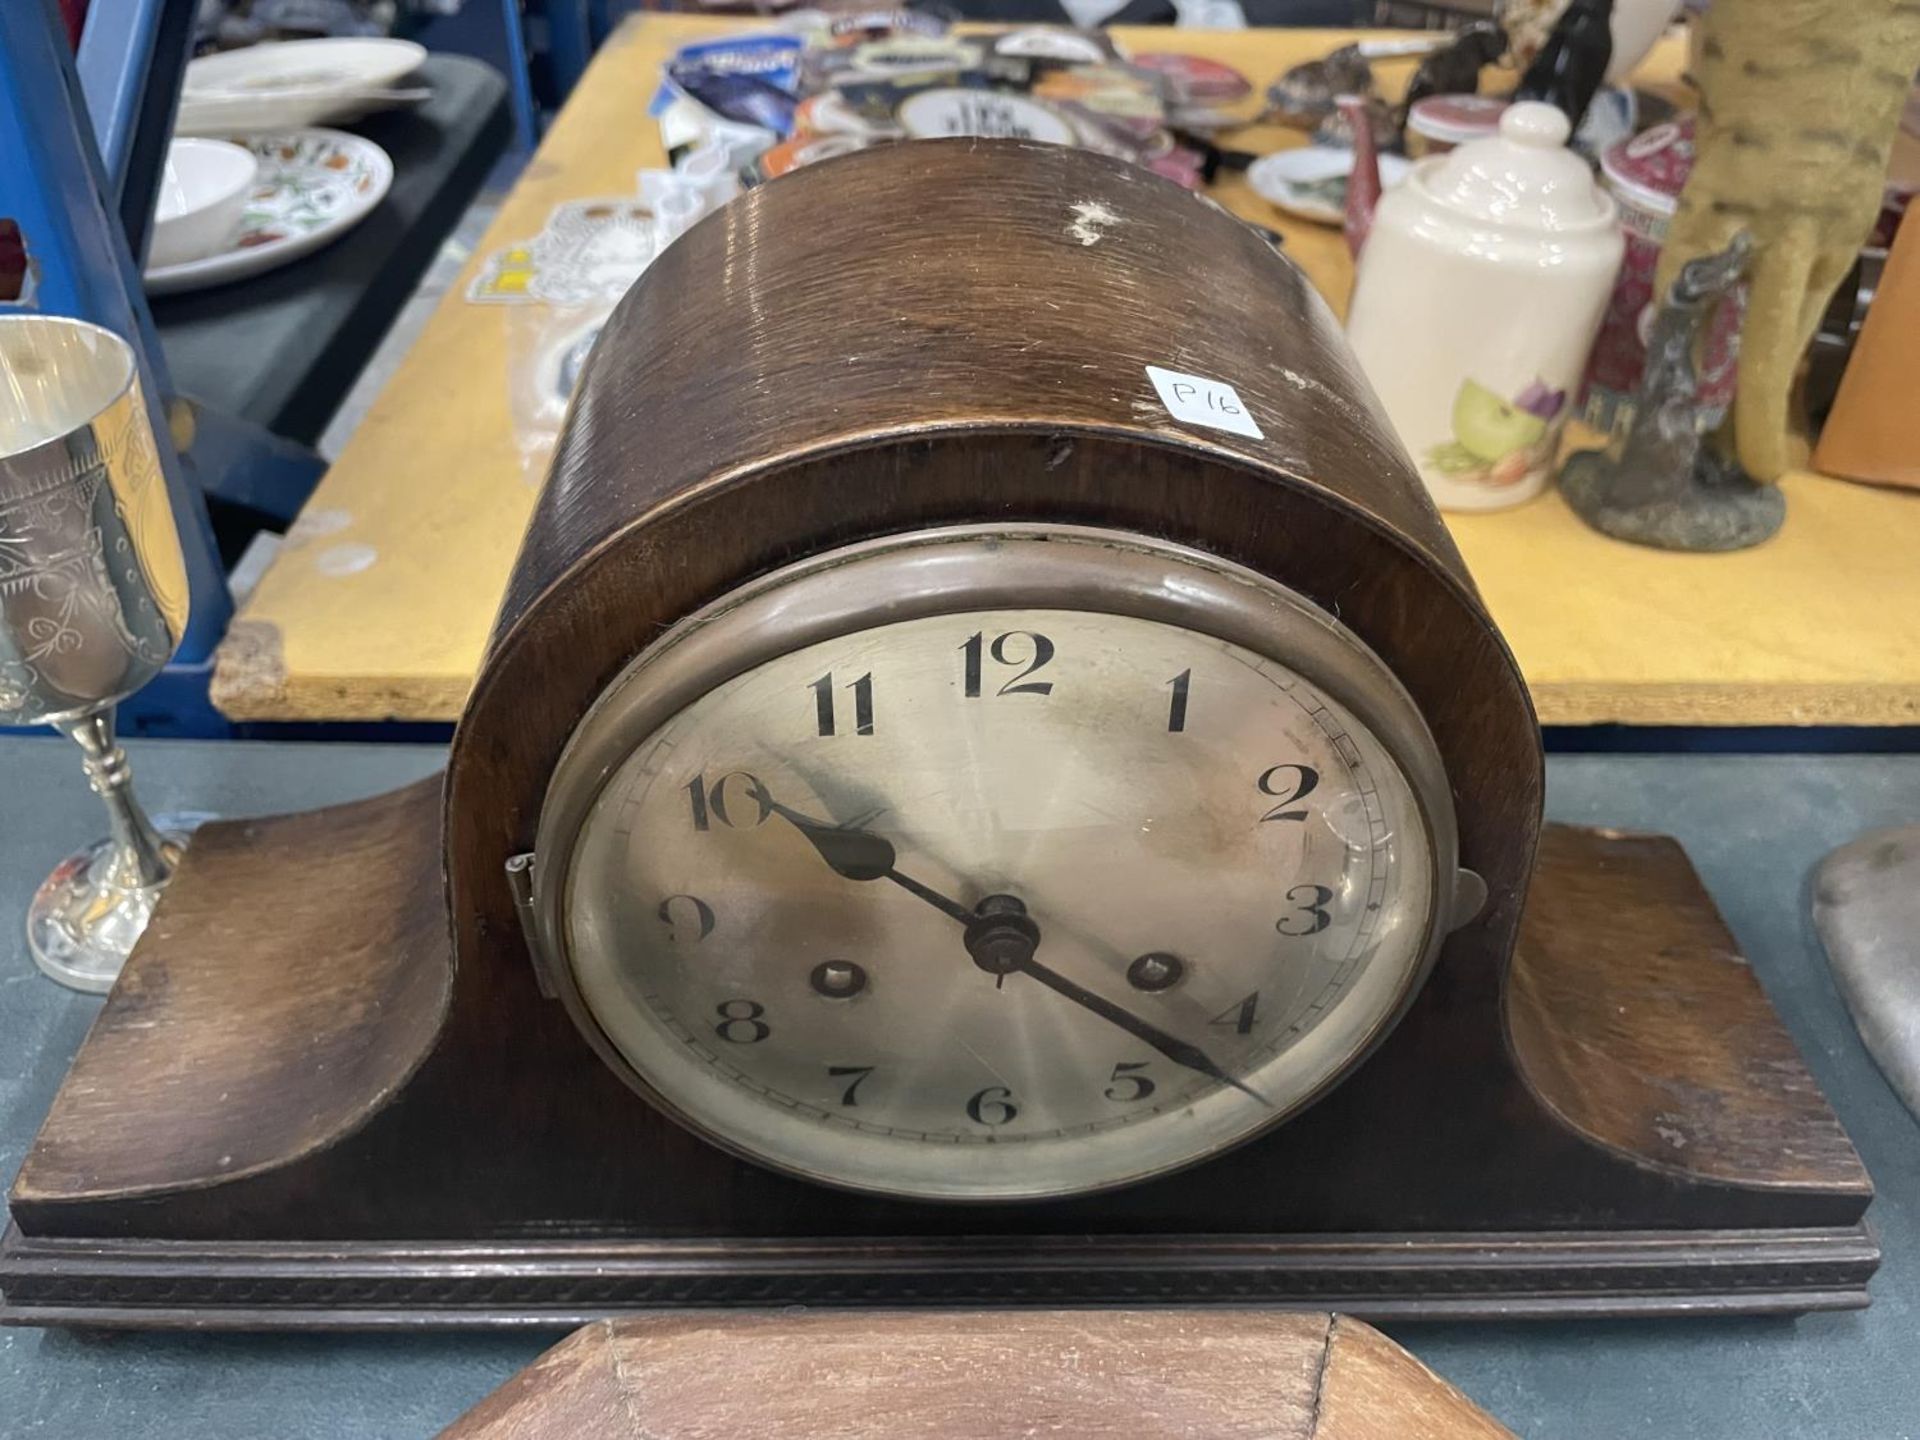 A VINTAGE SMITH'S ENFIELD MAHOGANY CASED WALL CLOCK IN NEED OF RESTORATION PLUS A NAPOLEON'S HAT - Image 4 of 4